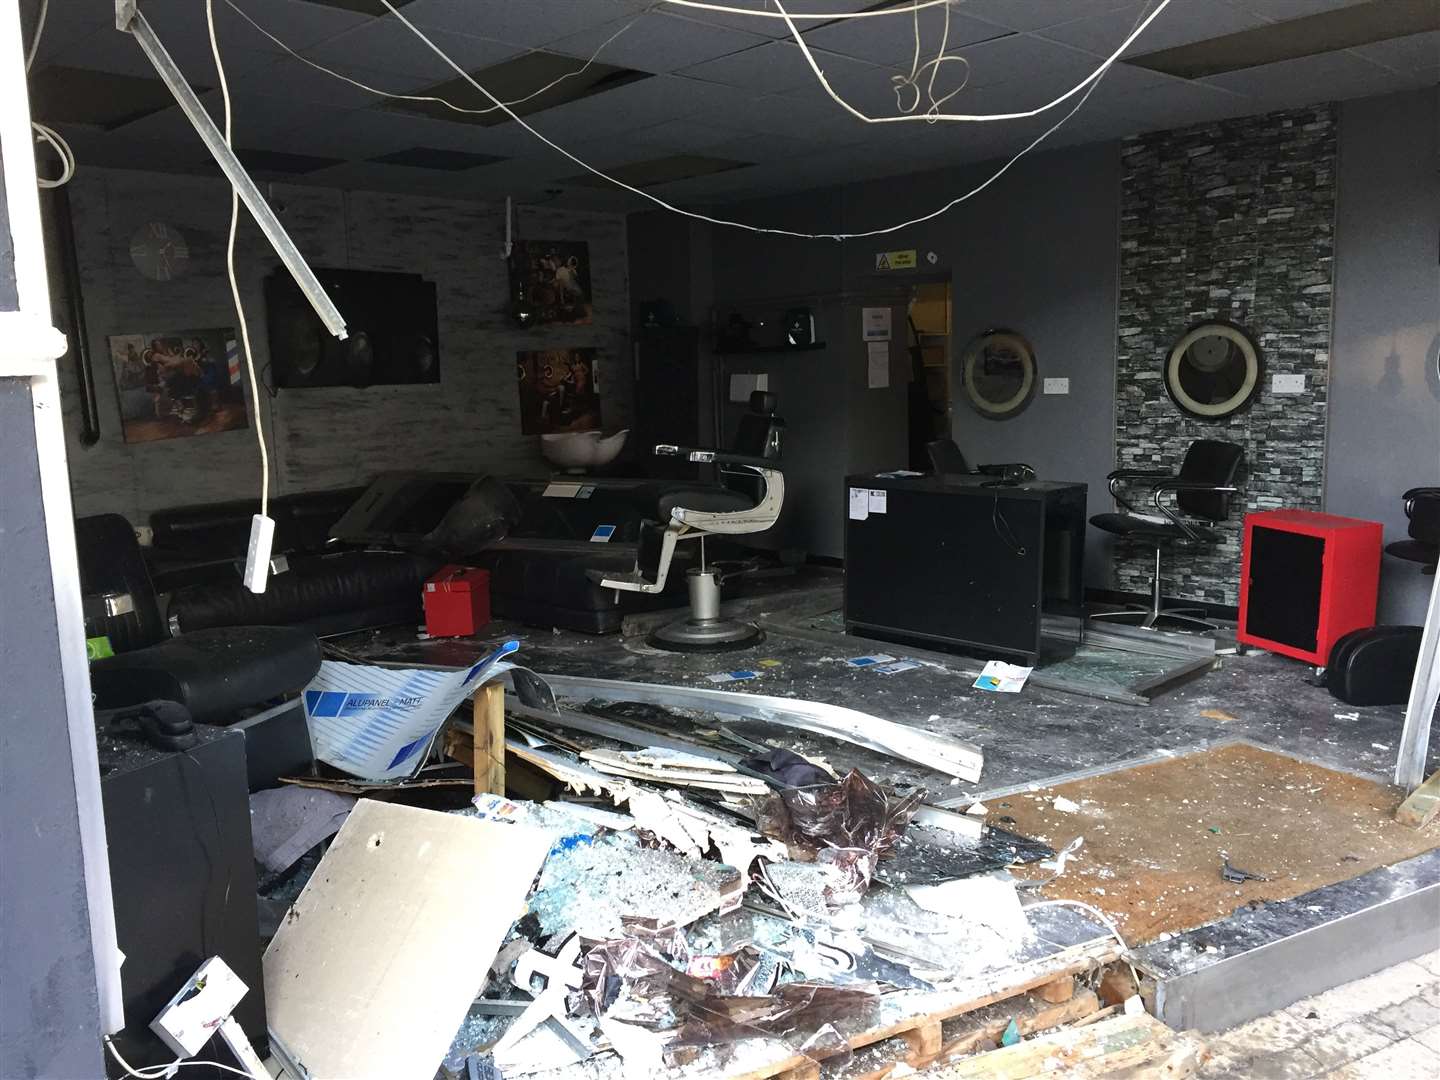 Shocking images show the extent of the damage done to Partners Hair Studio in Herne Bay following the crash this morning